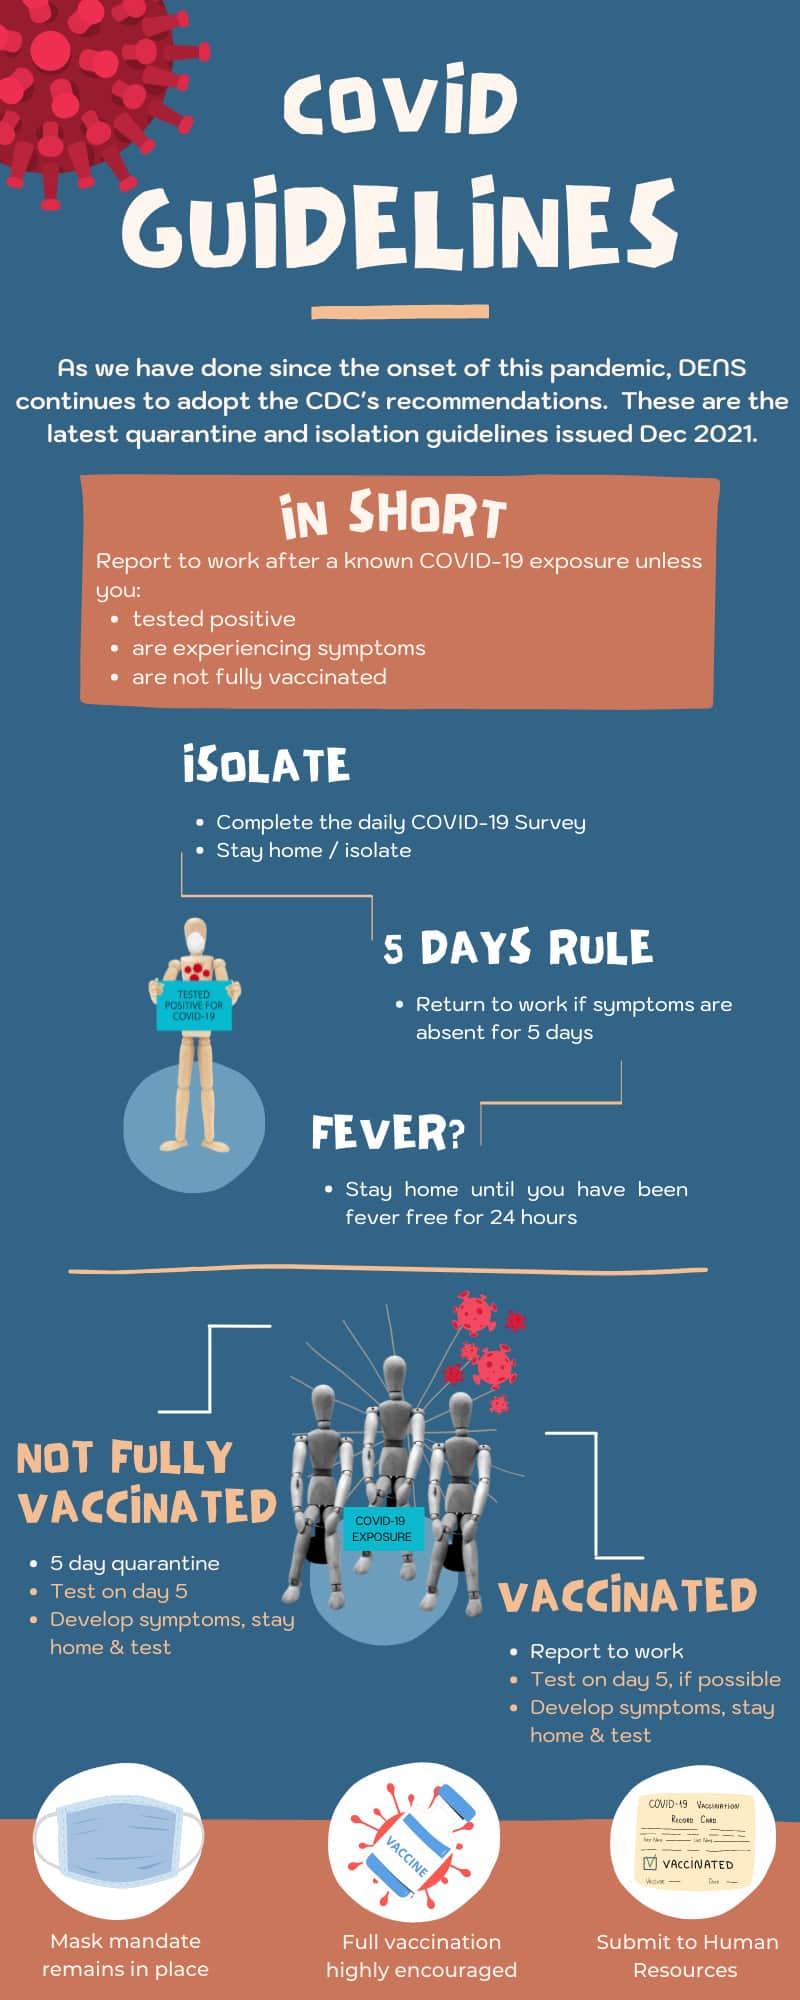 COVID Guidelines Infographic